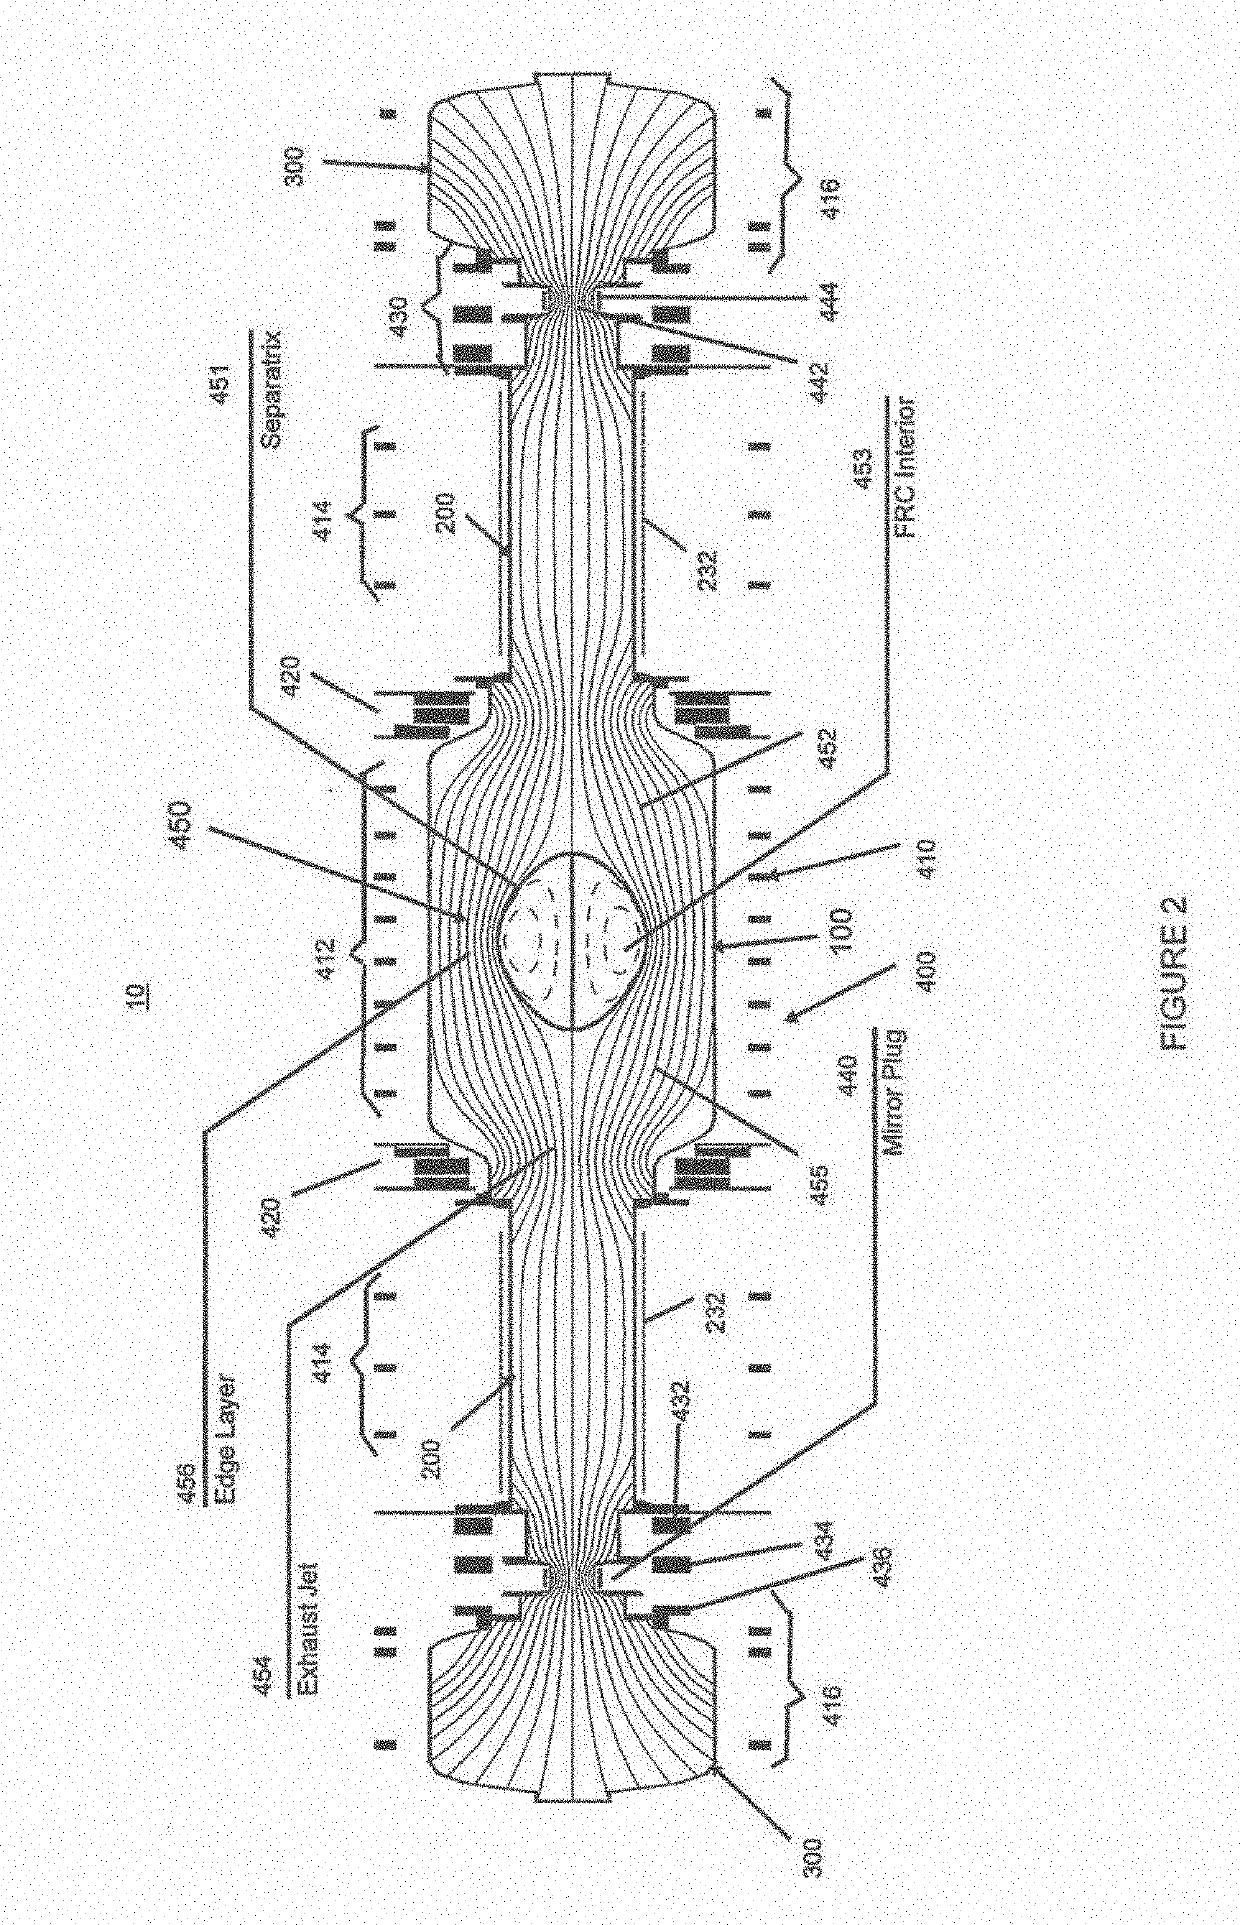 Systems and methods for improved sustainment of a high performance frc and high harmonic fast wave electron heating in a high performance frc